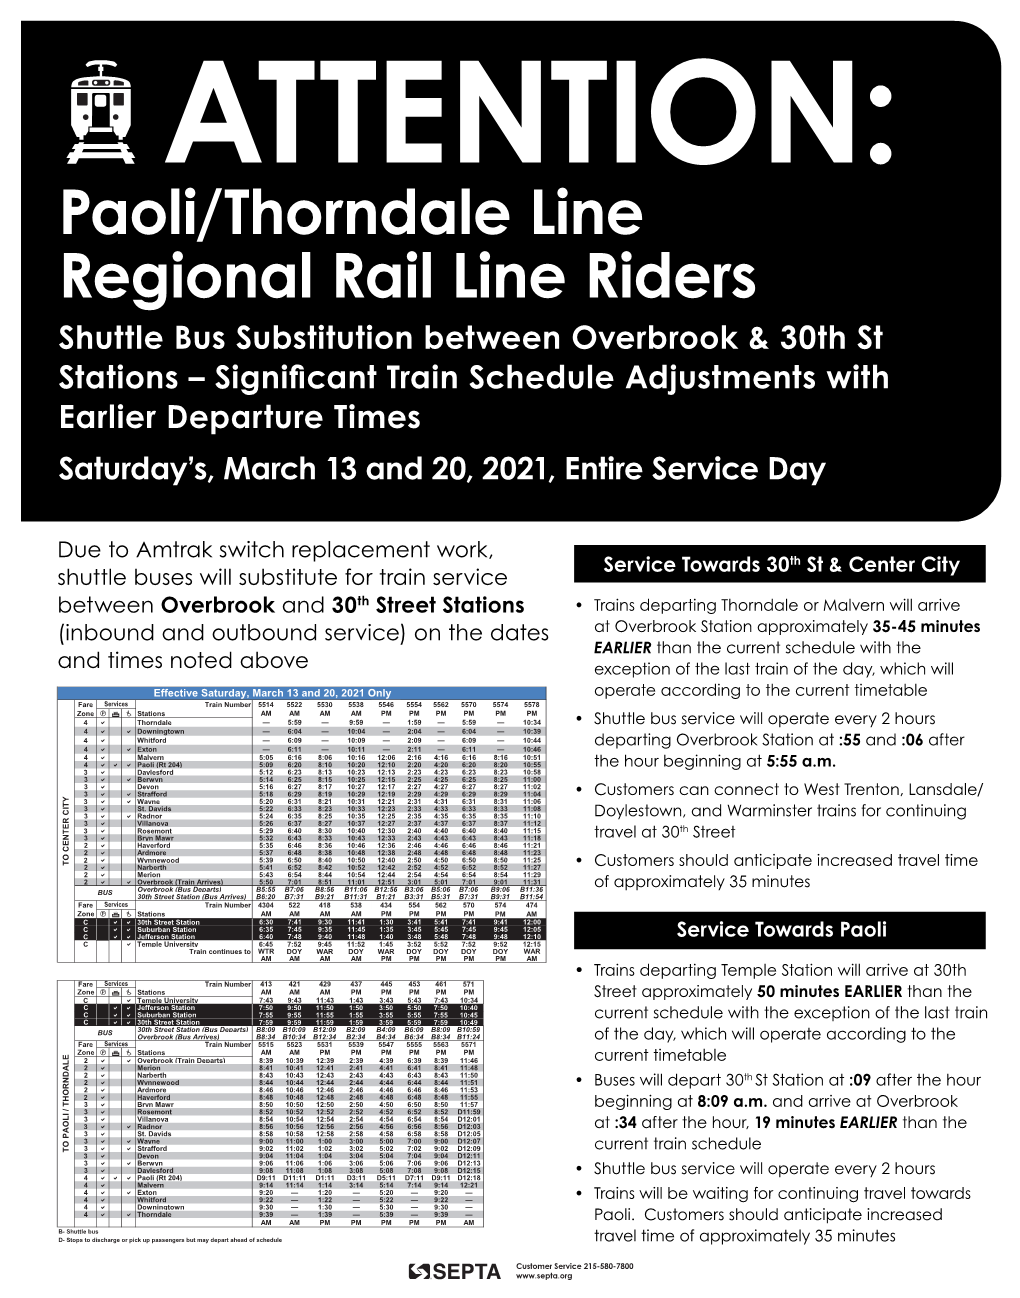 Shuttle Bus Substitution Between Overbrook & 30Th St Stations